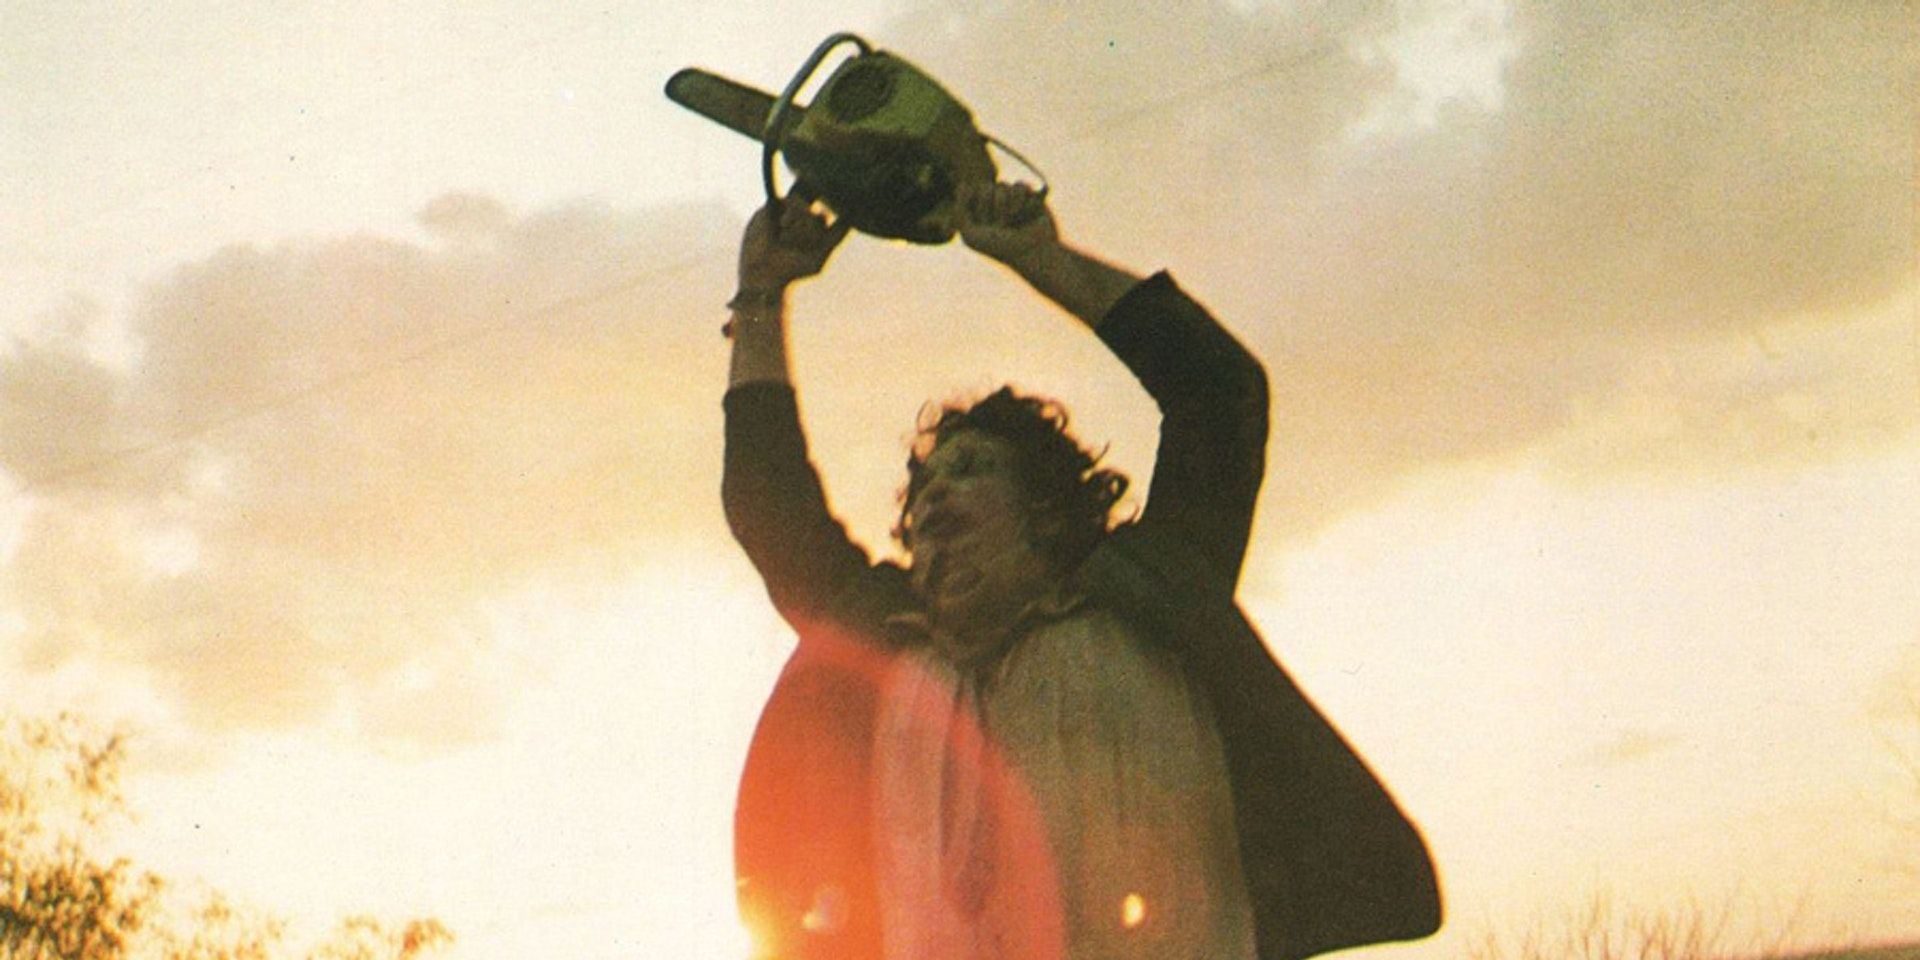 Leatherface dancing during the finale of The Texas Chainsaw Massacre.